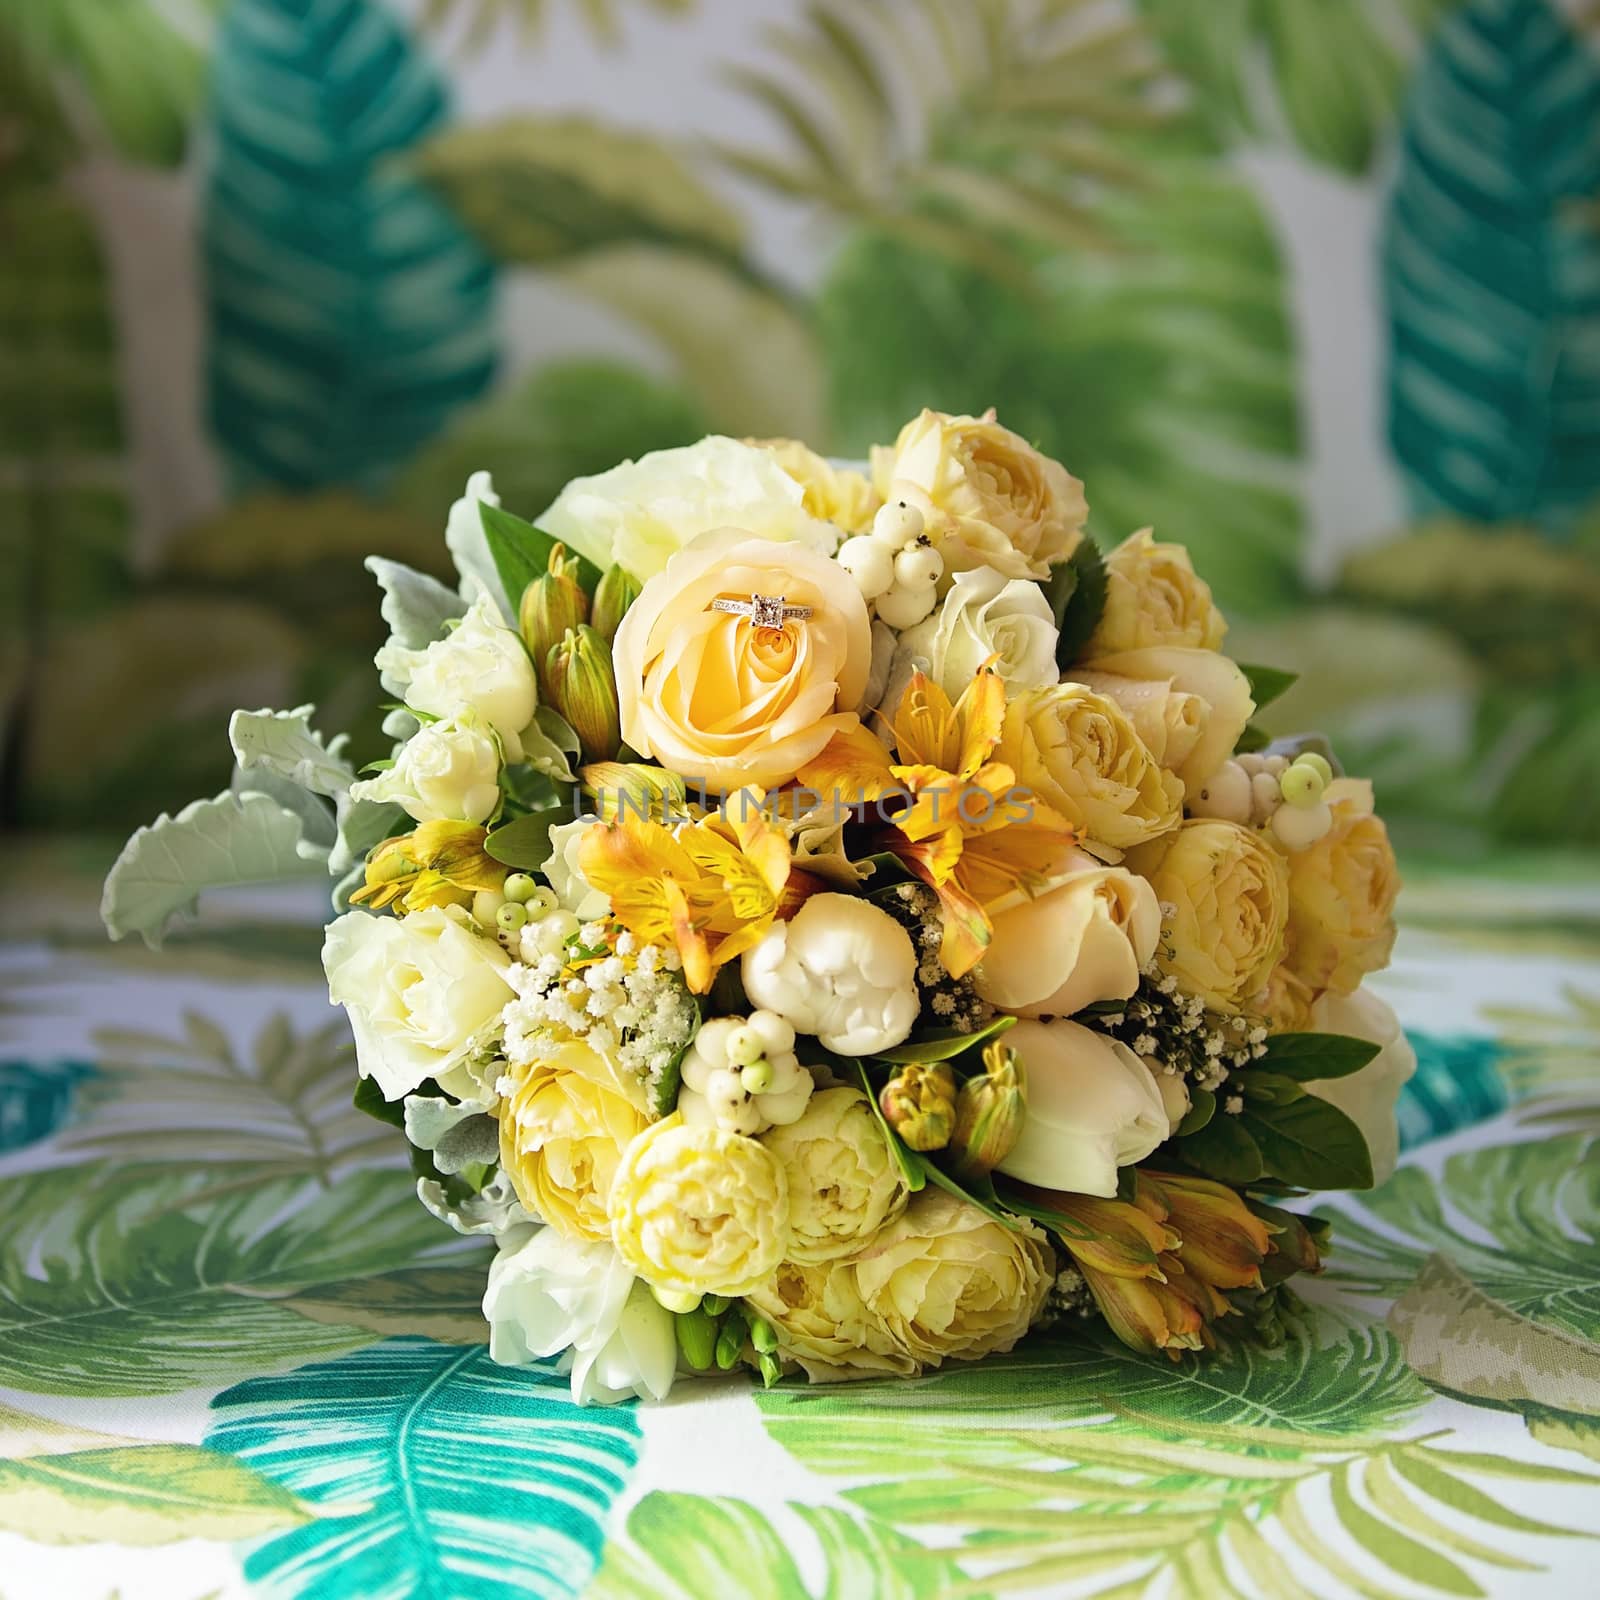 A floral bridal bouquet of yellow blooms against a leafy patterned background